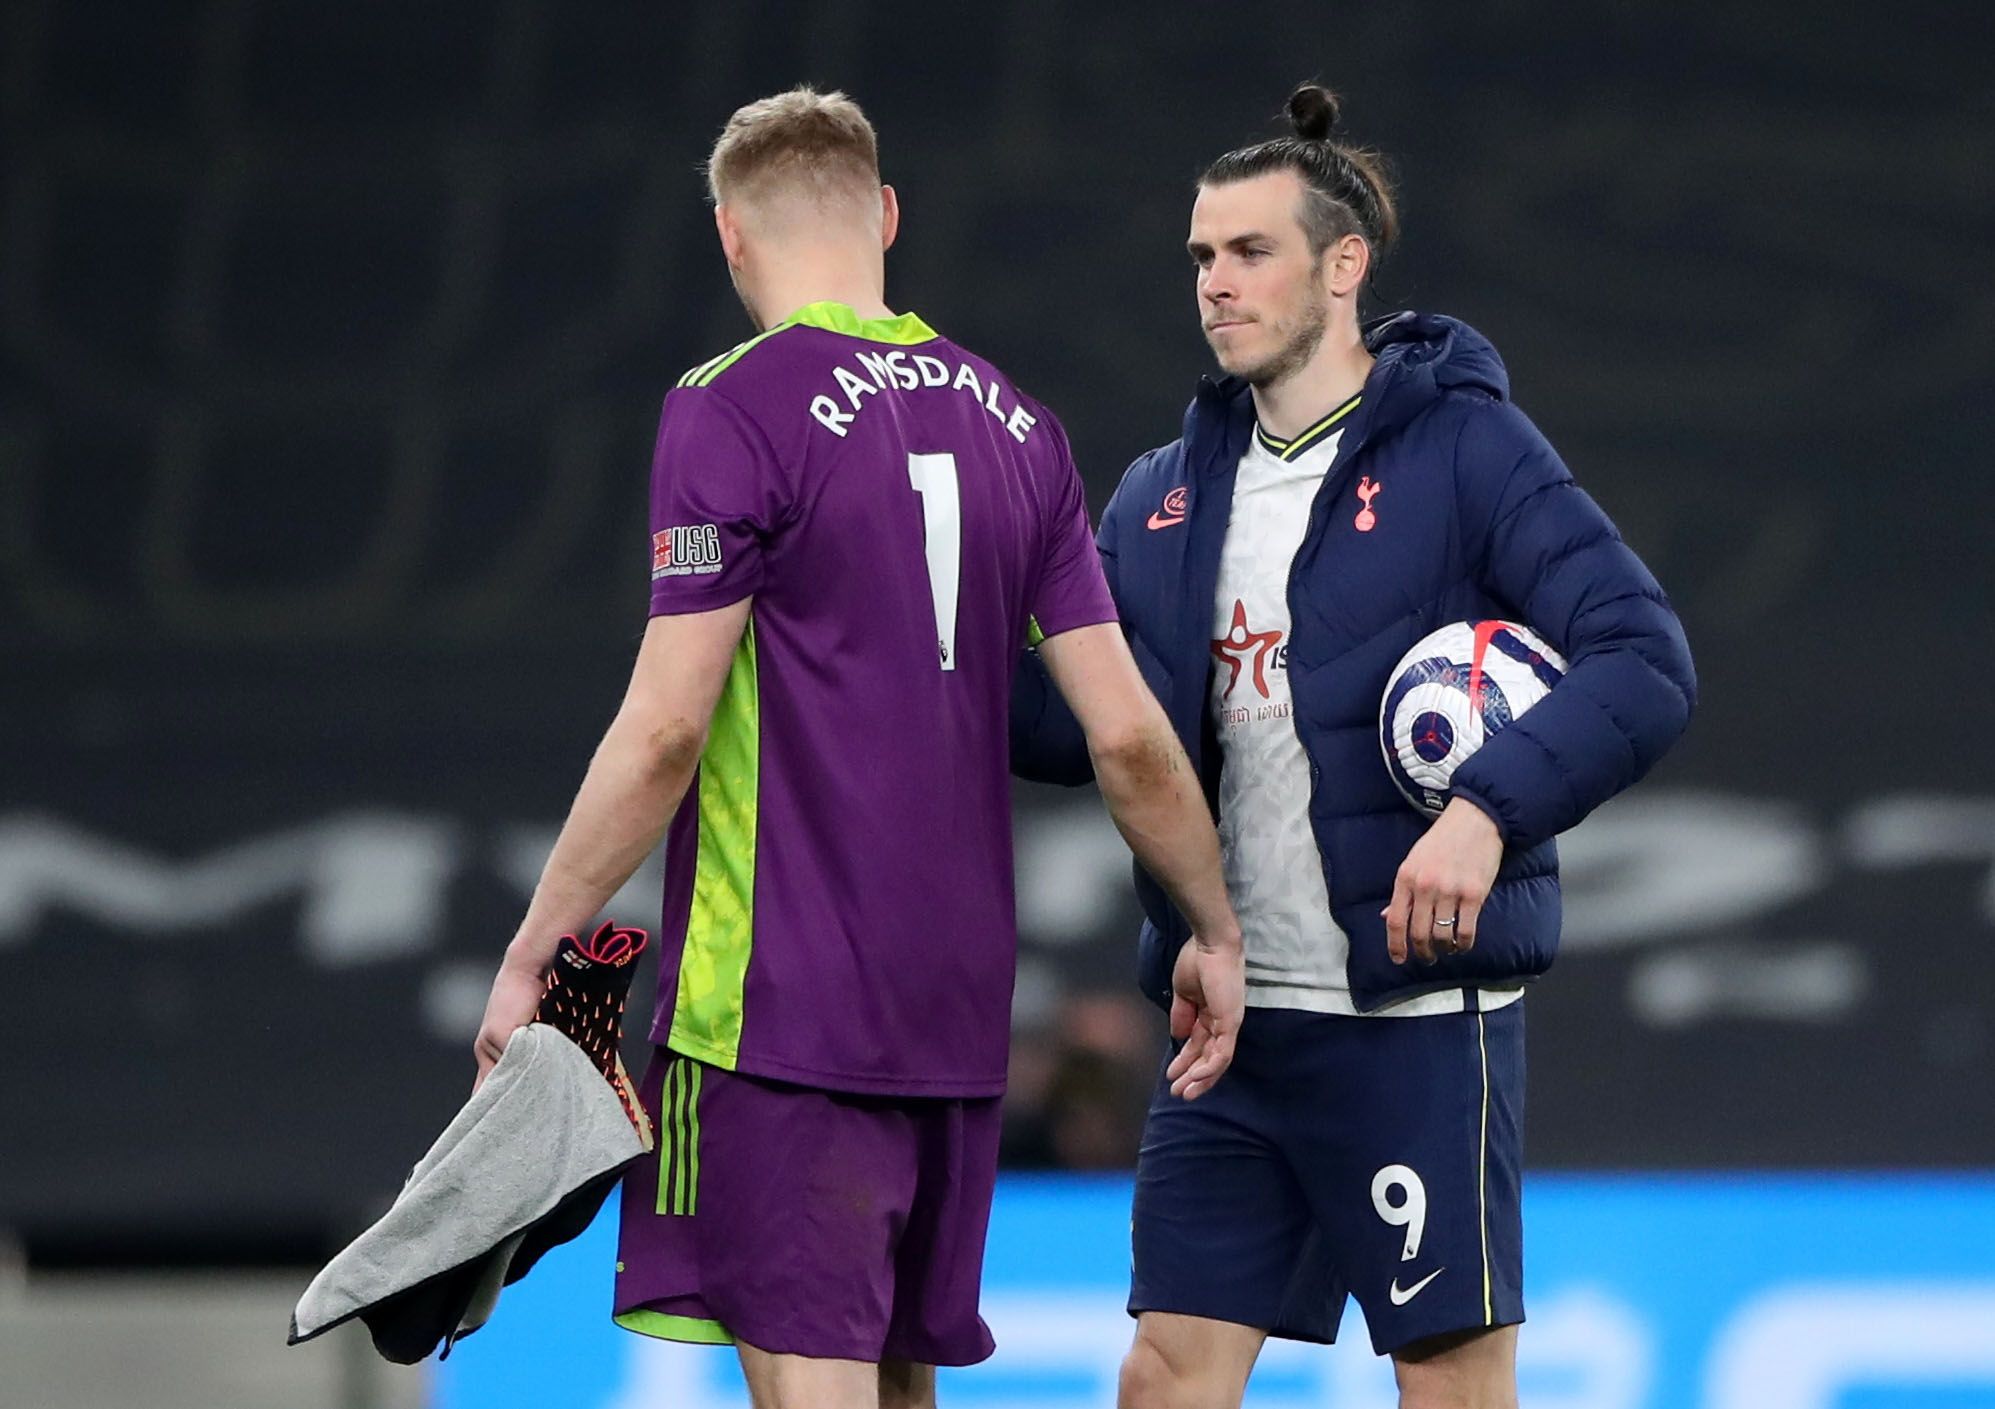 Soccer Football - Premier League - Tottenham Hotspur v Sheffield United - Tottenham Hotspur Stadium, London, Britain - May 2, 2021 Tottenham Hotspur's Gareth Bale shakes hands with Sheffield United's Aaron Ramsdale after the match Pool via REUTERS/Nick Potts EDITORIAL USE ONLY. No use with unauthorized audio, video, data, fixture lists, club/league logos or 'live' services. Online in-match use limited to 75 images, no video emulation. No use in betting, games or single club /league/player public